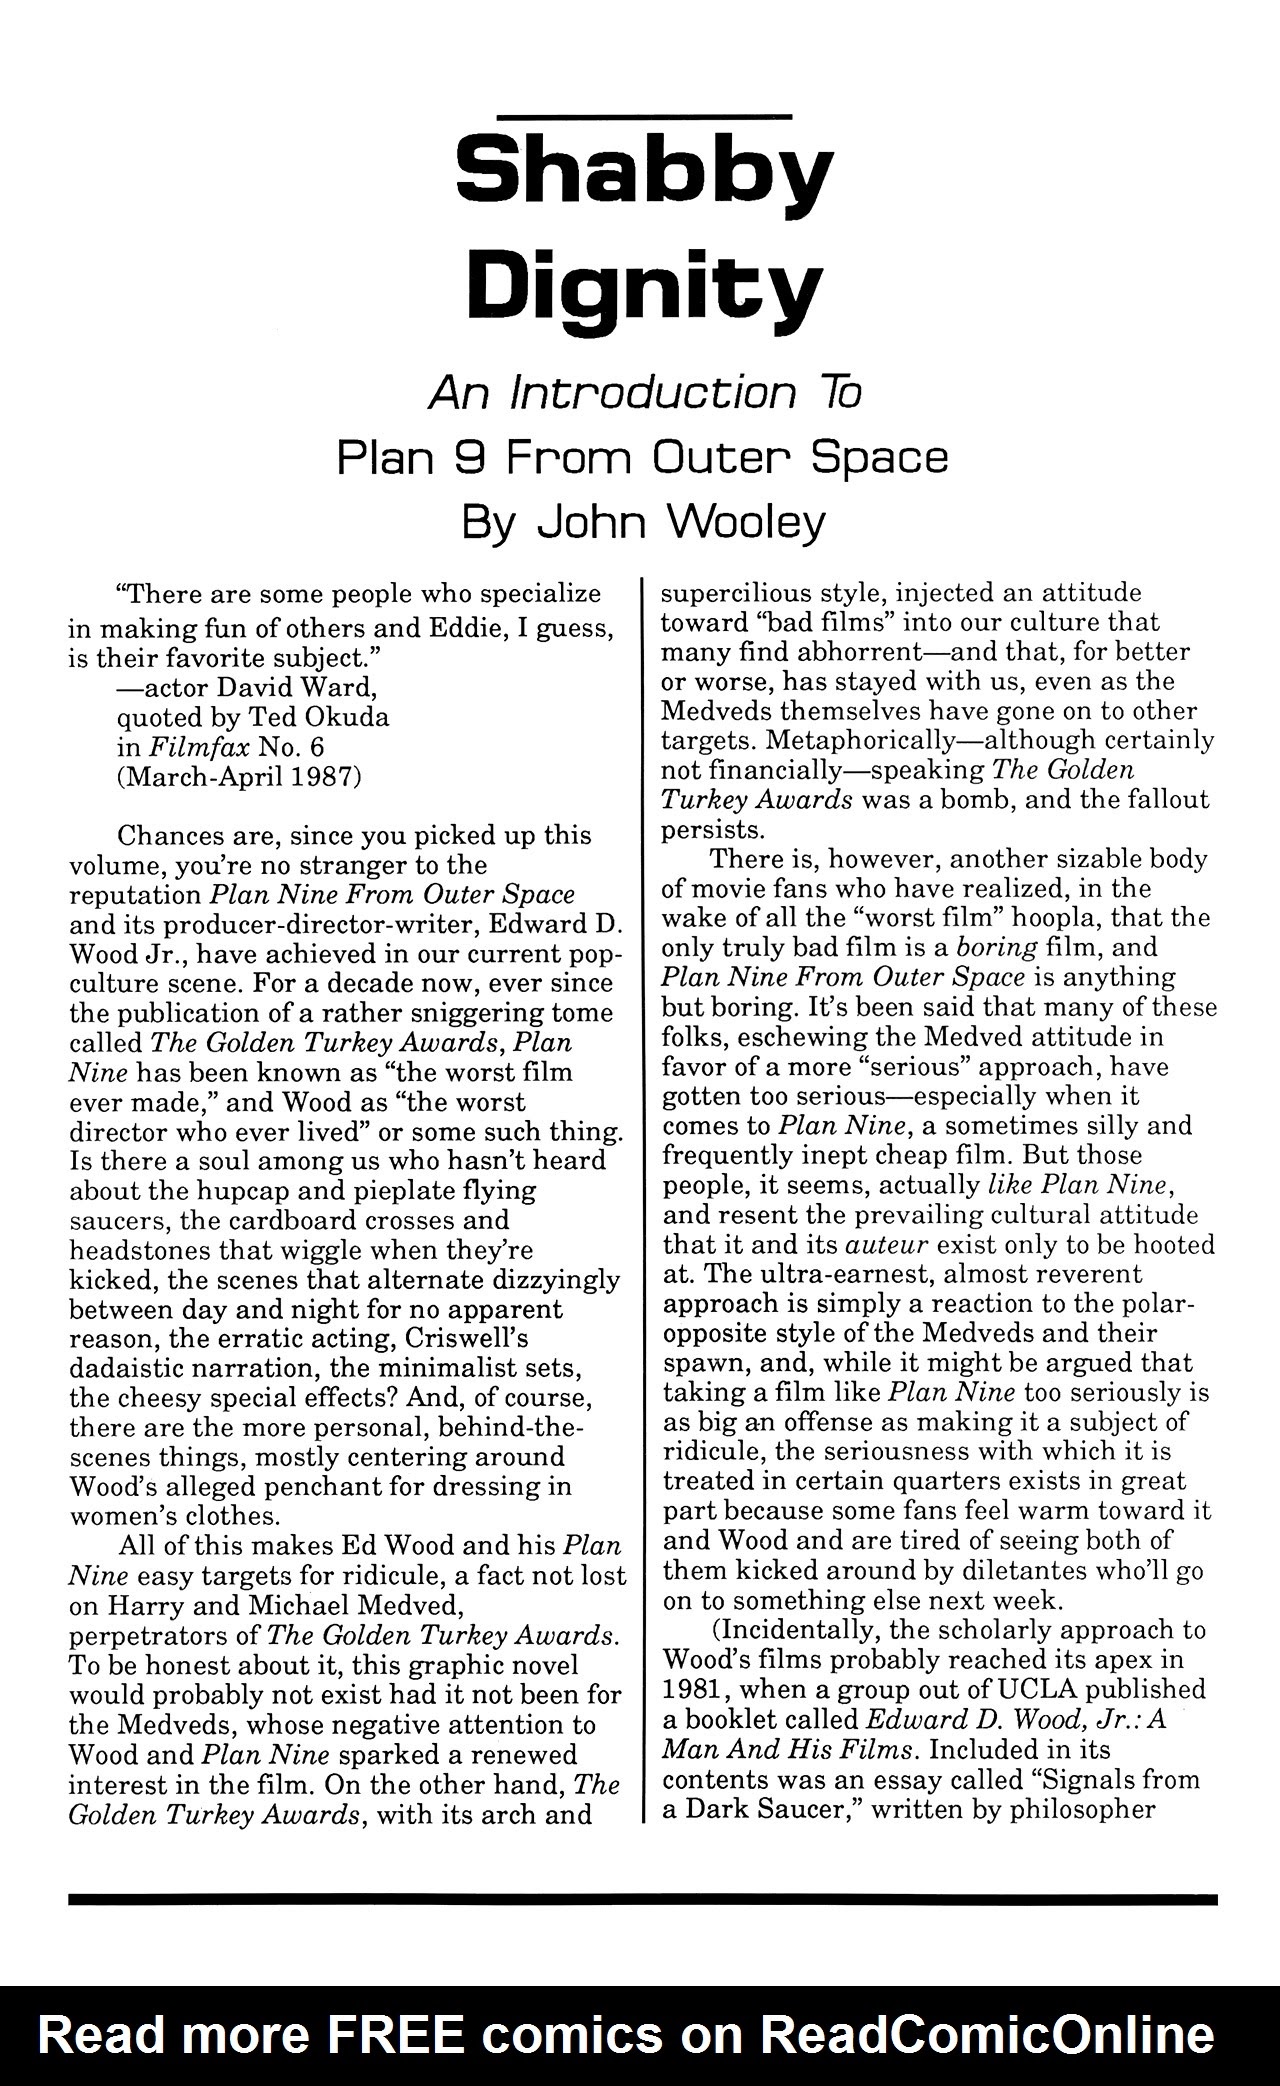 Read online Plan 9 from Outer Space comic -  Issue # Full - 5